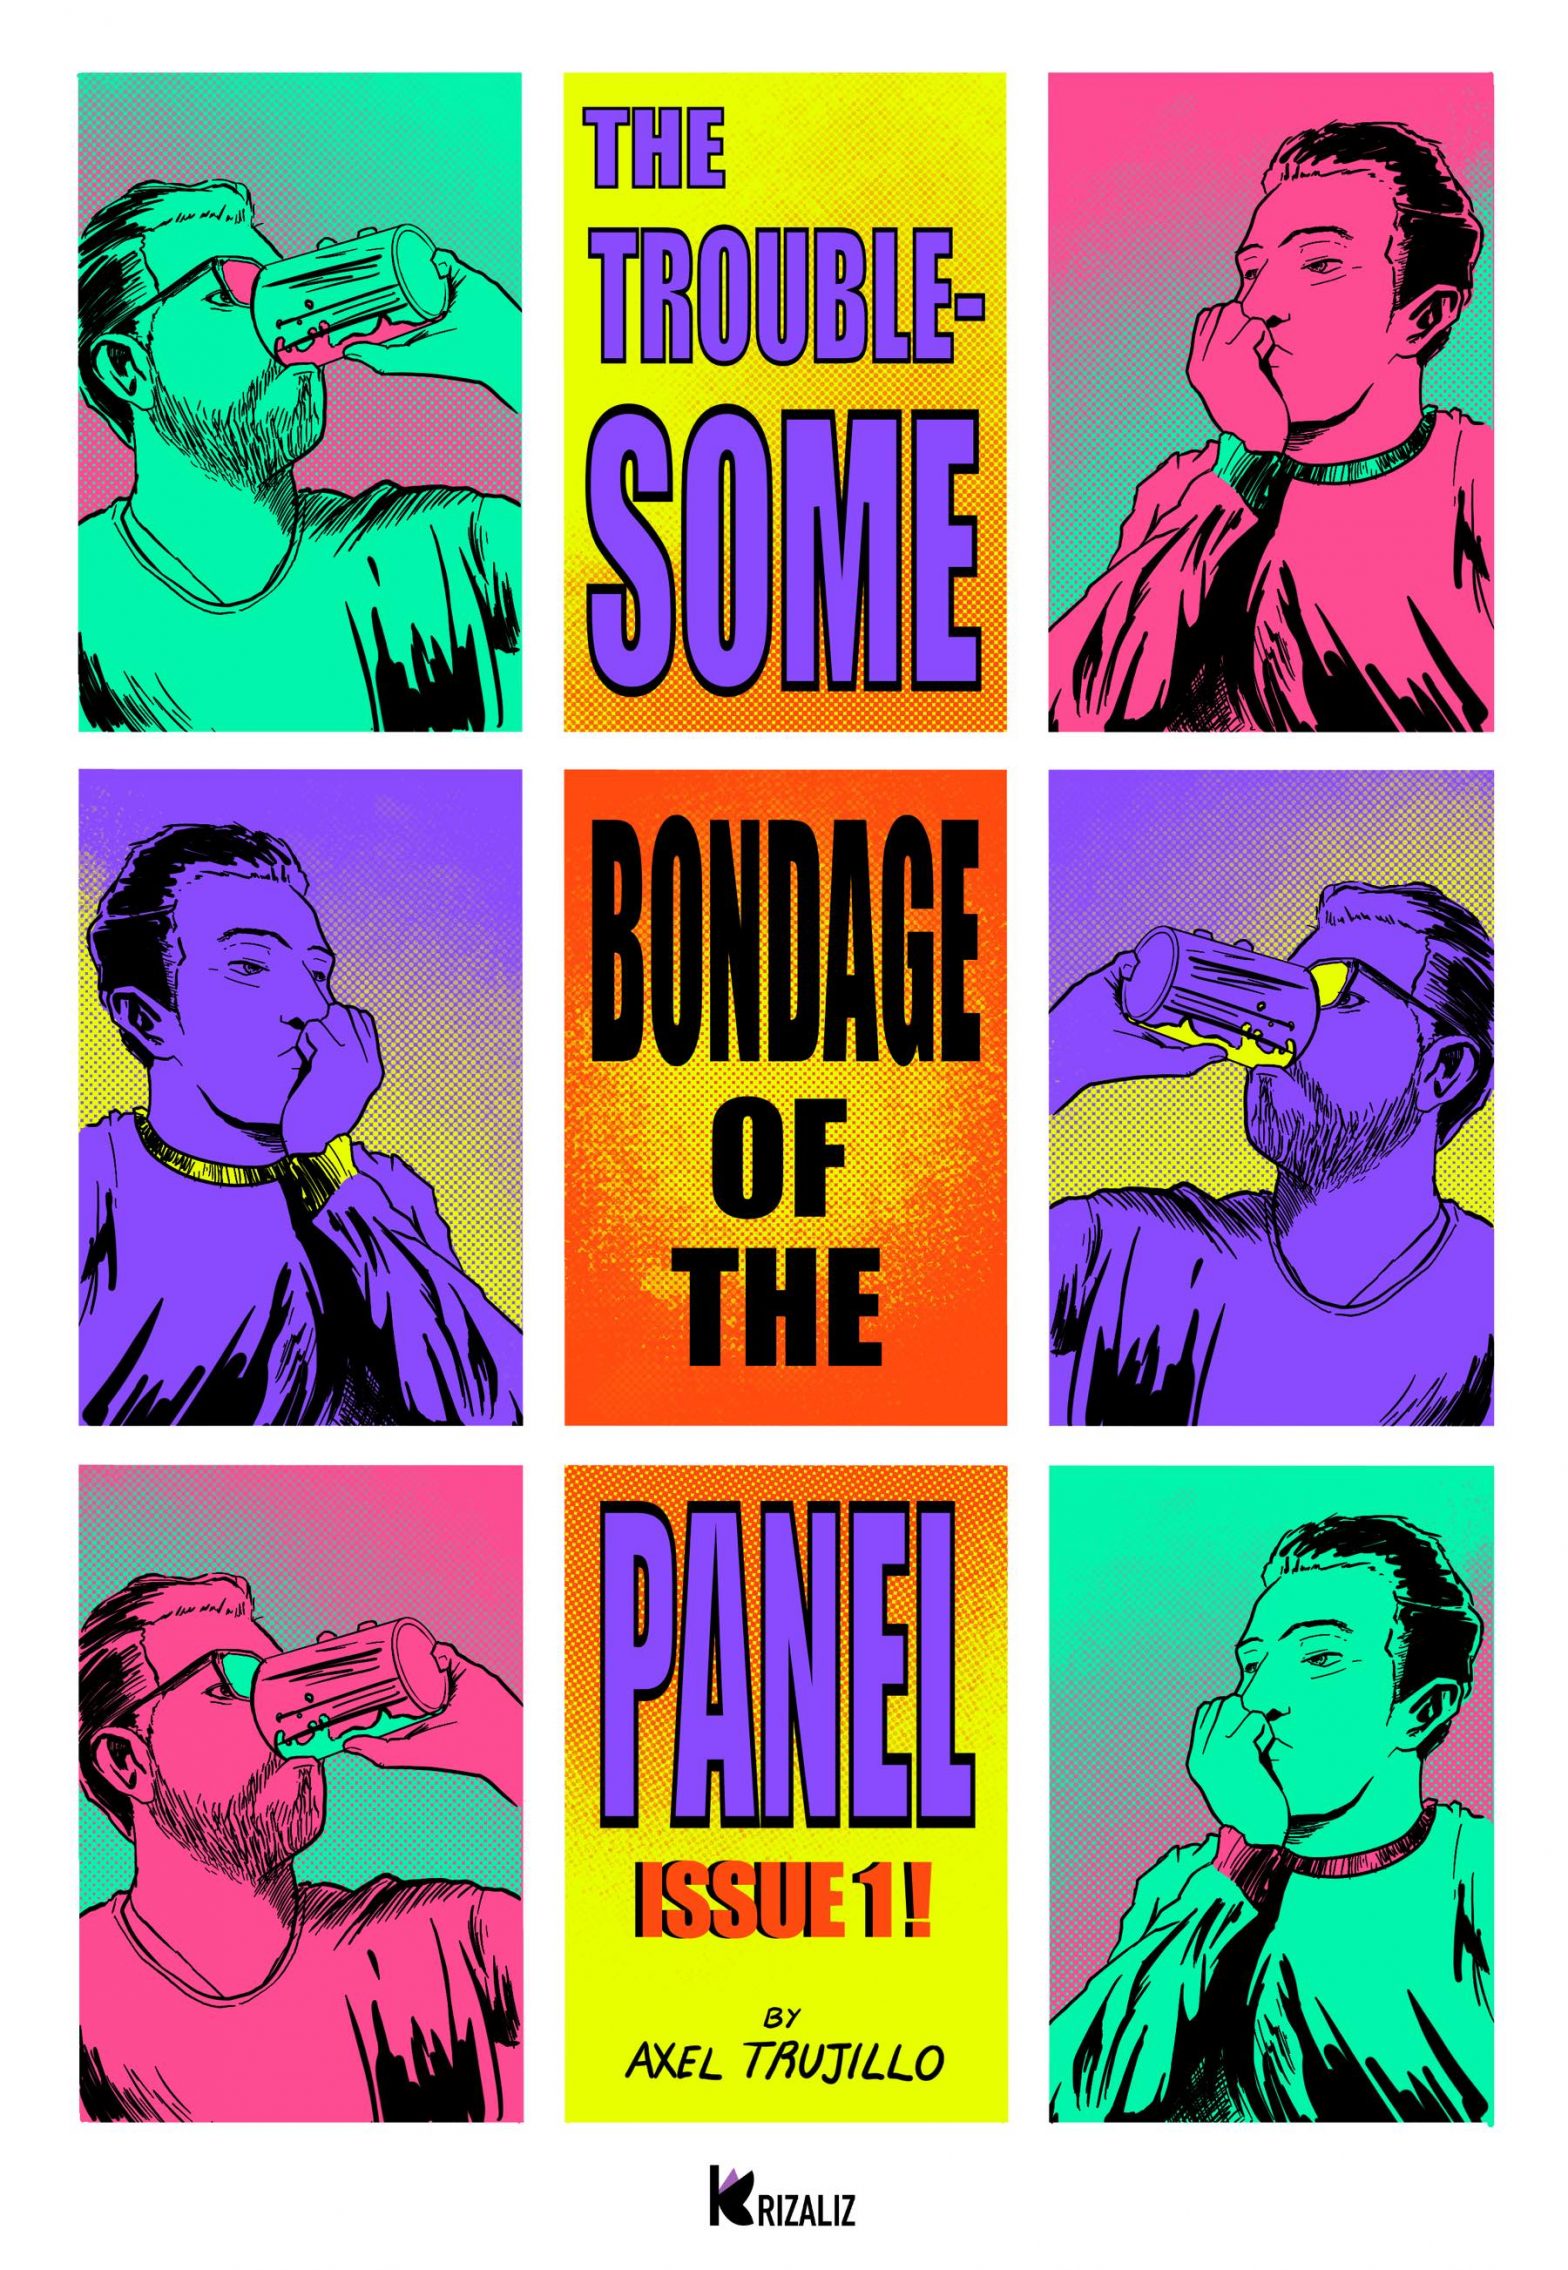 The Troublesome Bondage of the Panel